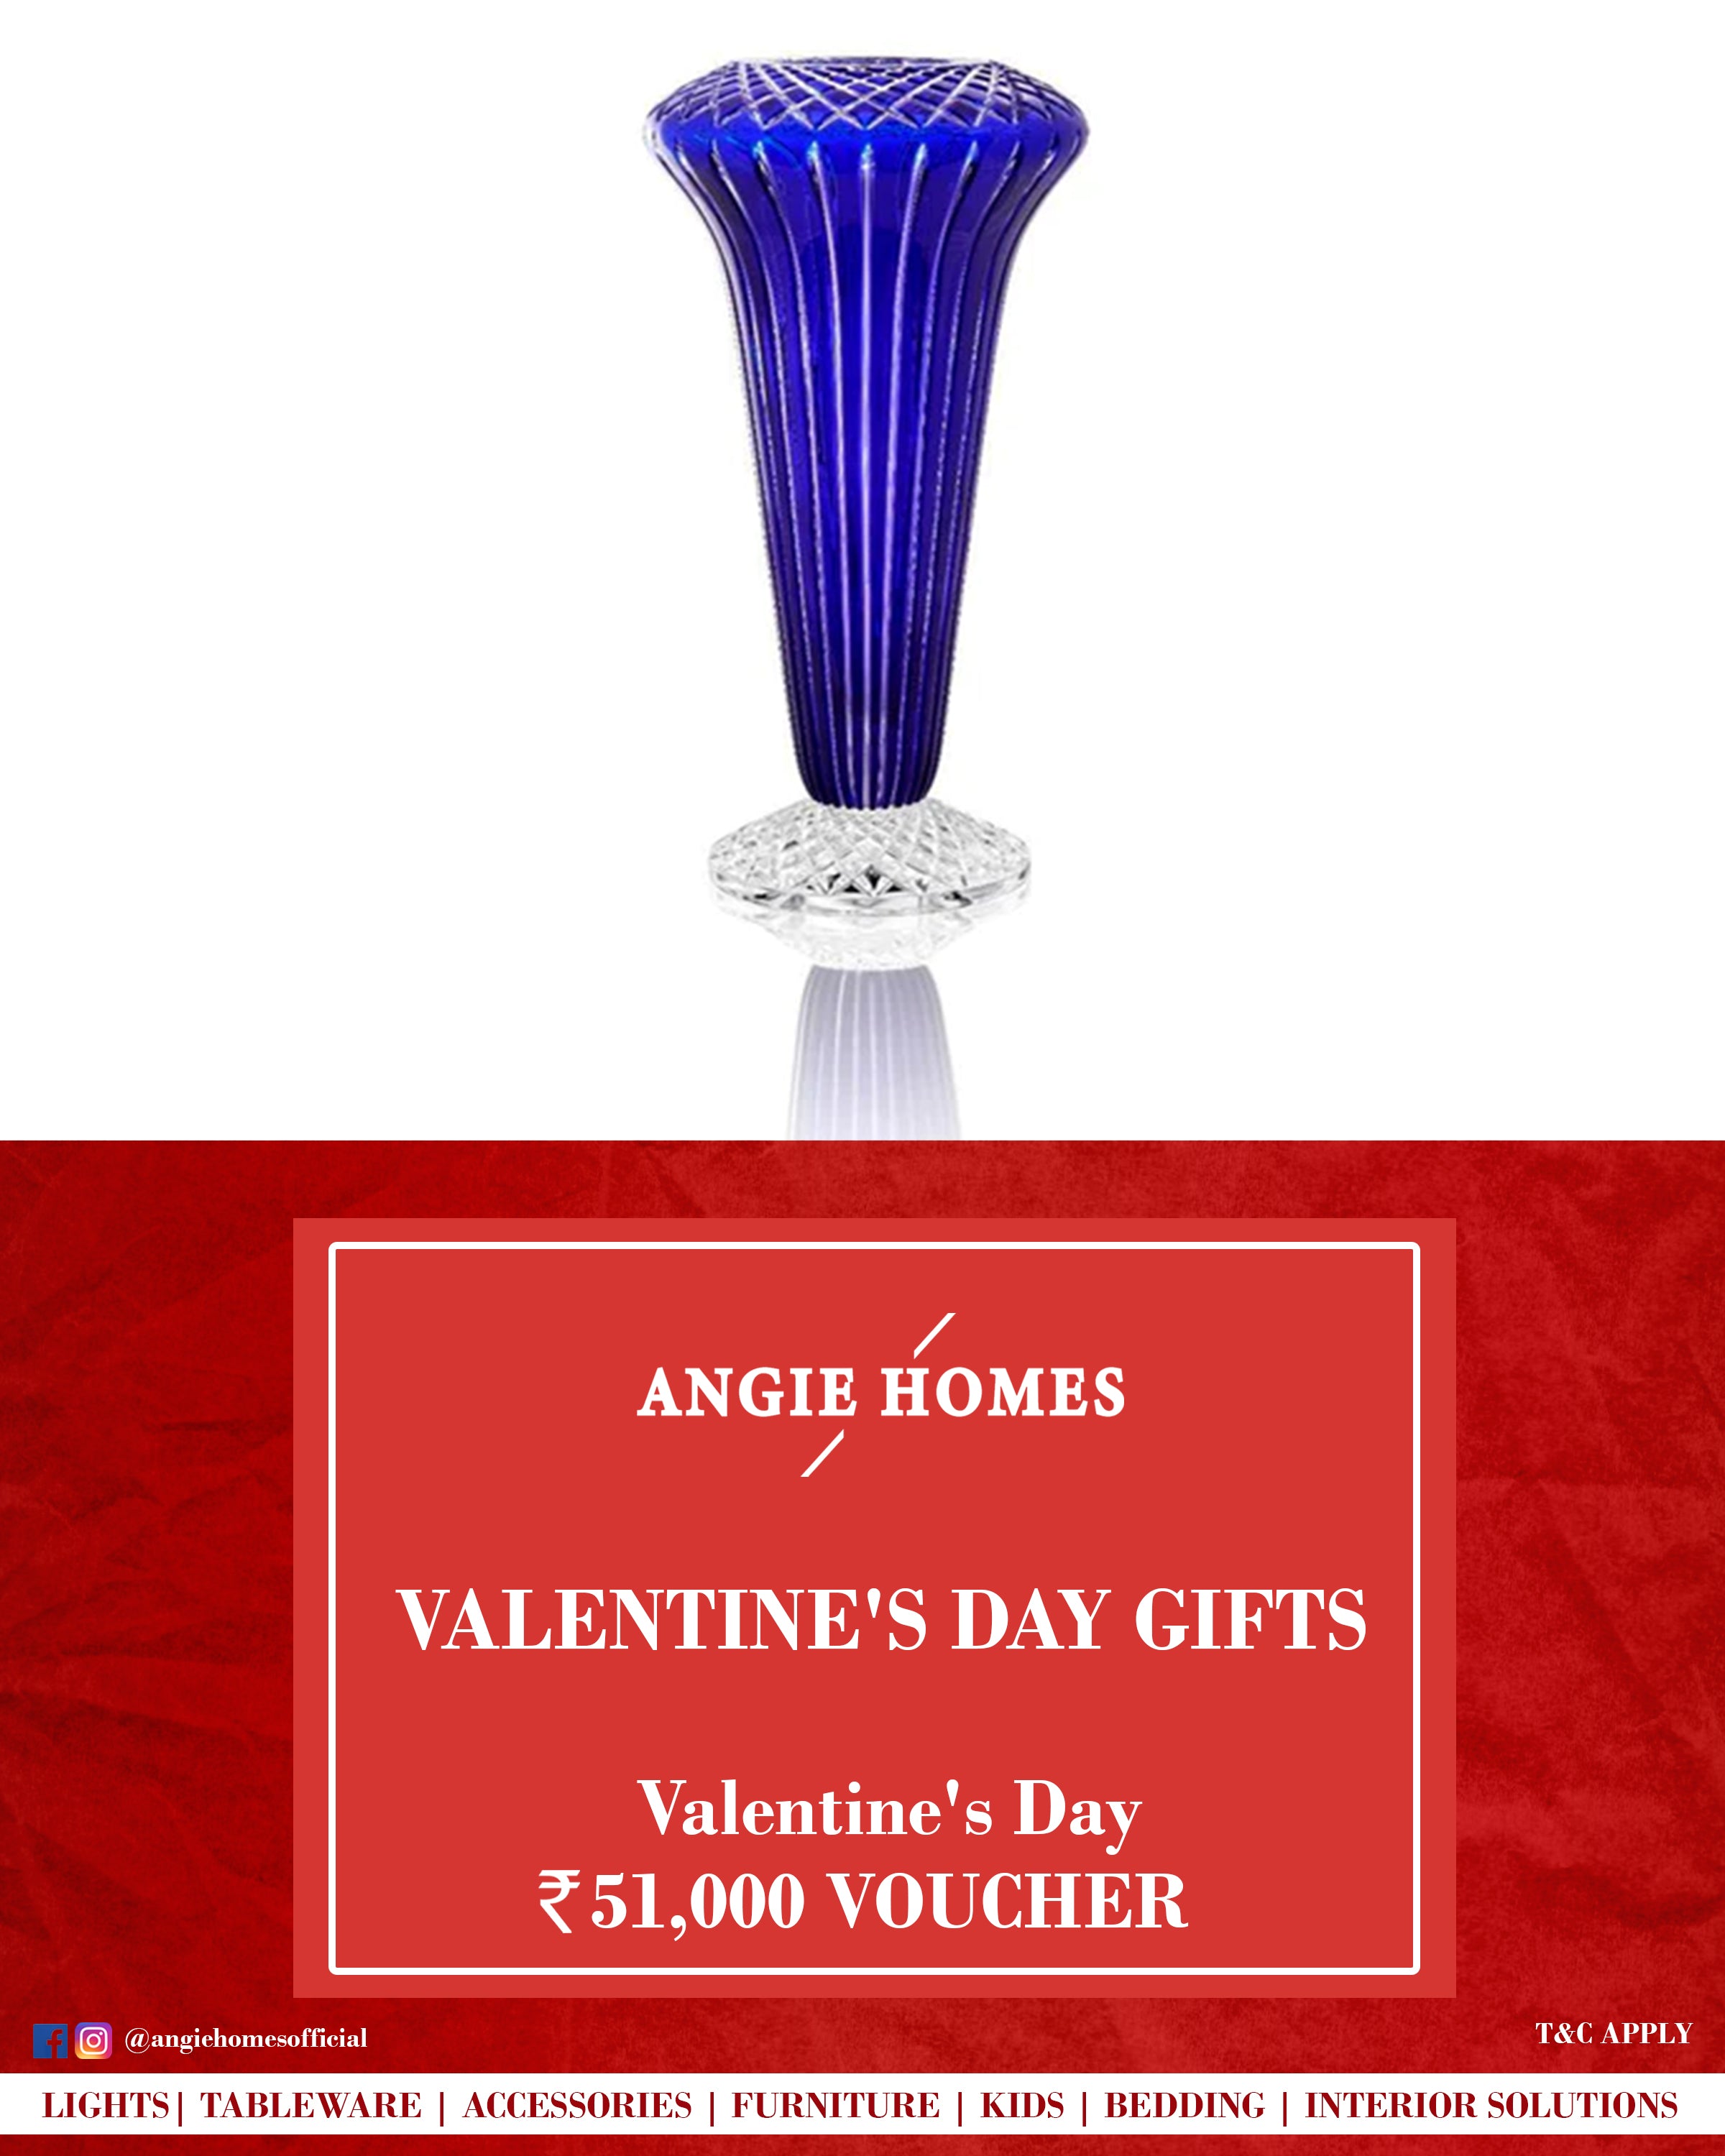 Online Happy Valentine's Day Gift Card Voucher for Round Murano Glass Vases ANGIE HOMES